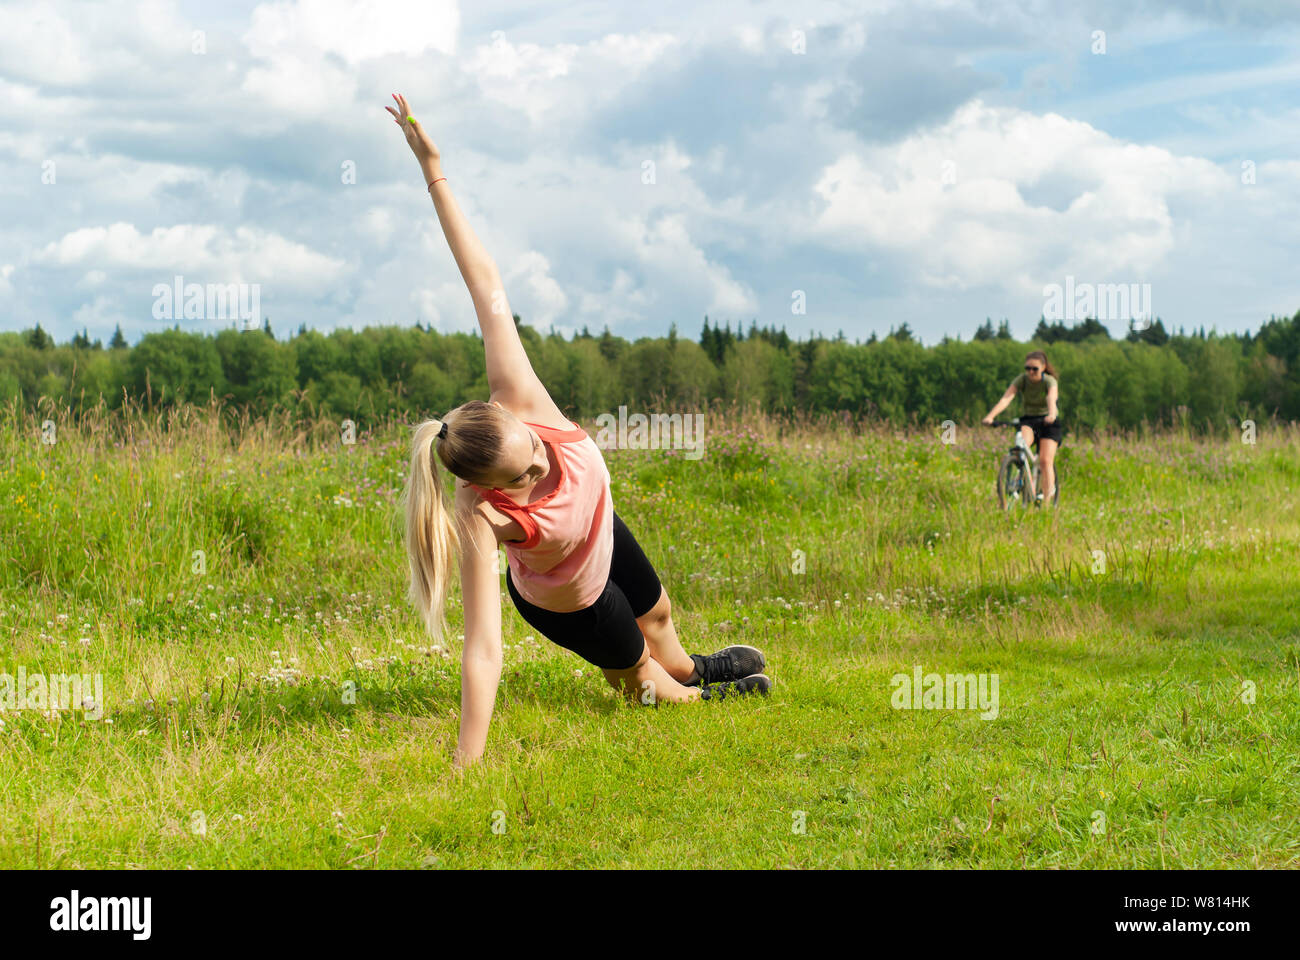 Perm, Russia - July 23, 2019: young woman doing exercise side plank on the grass outdoor while a female cyclist rides in the background Stock Photo